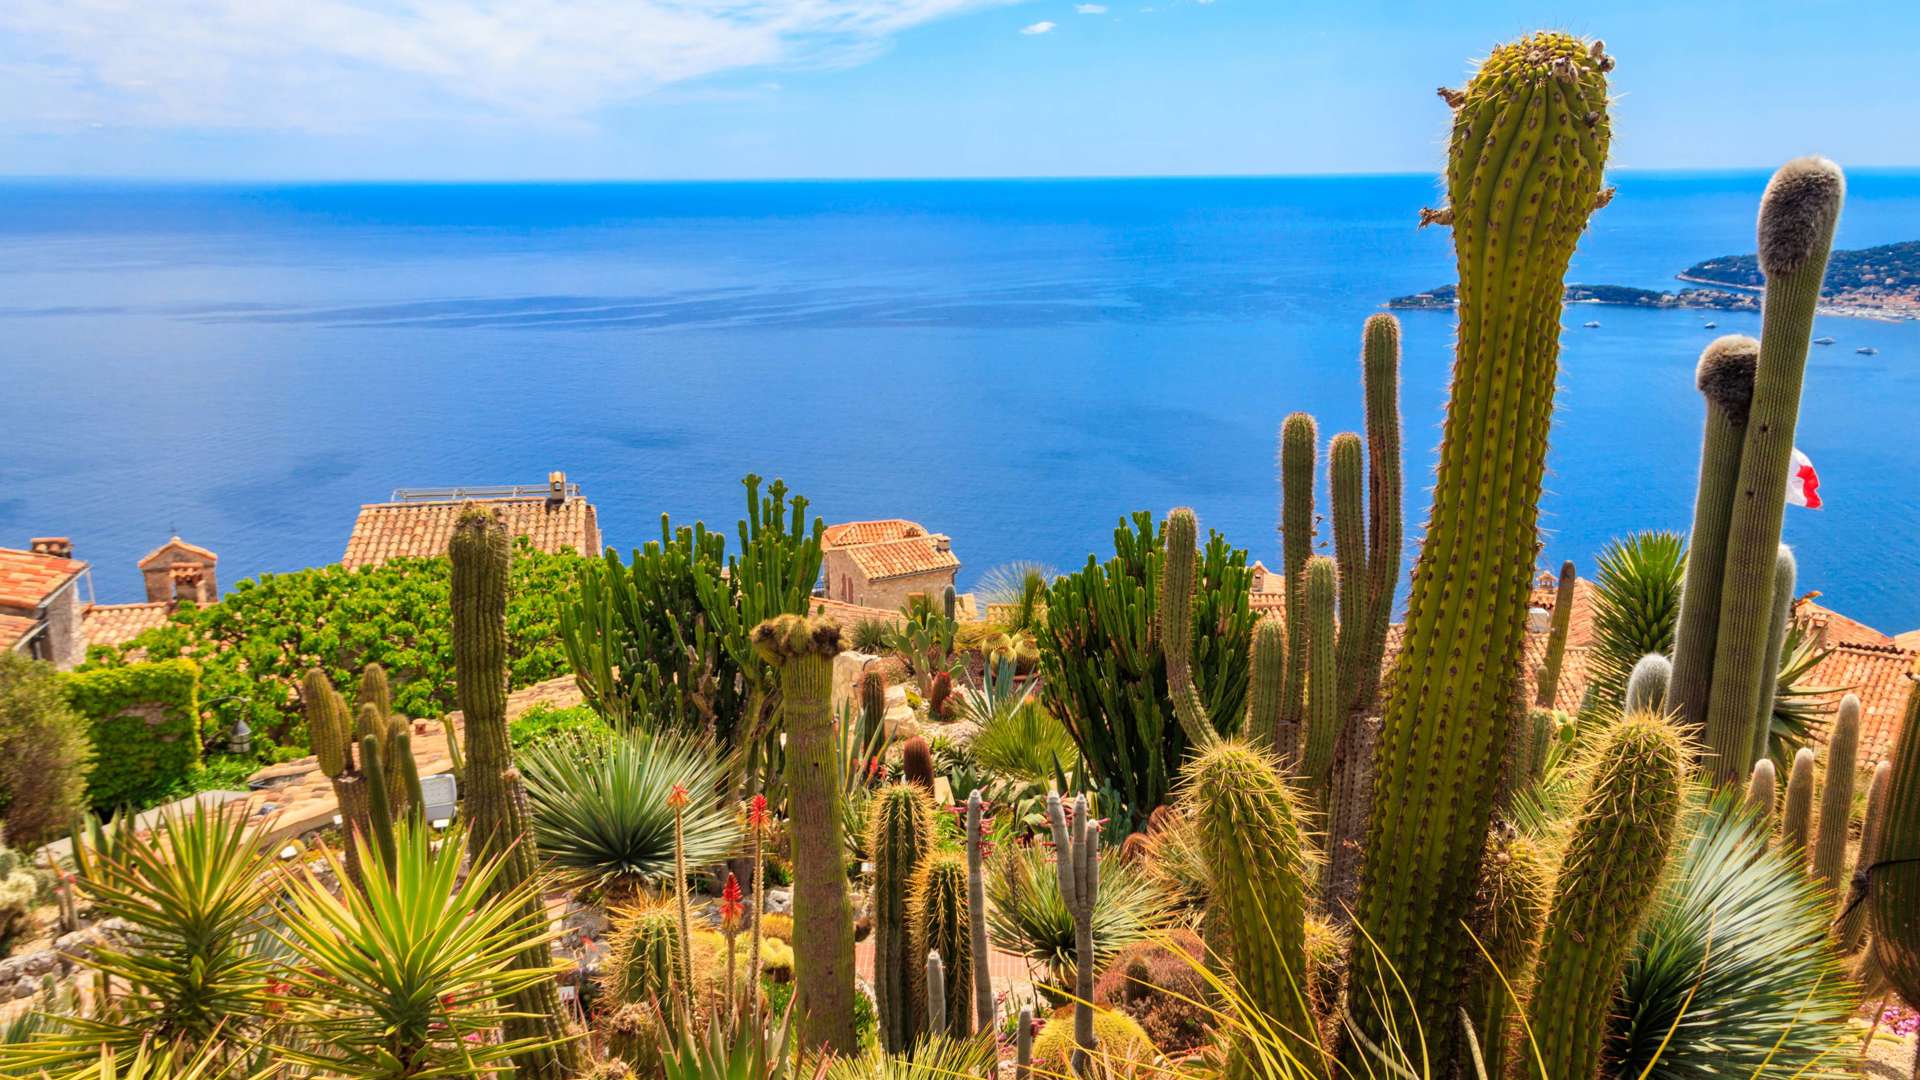 Exotic Garden Of Eze, French Riviera, France